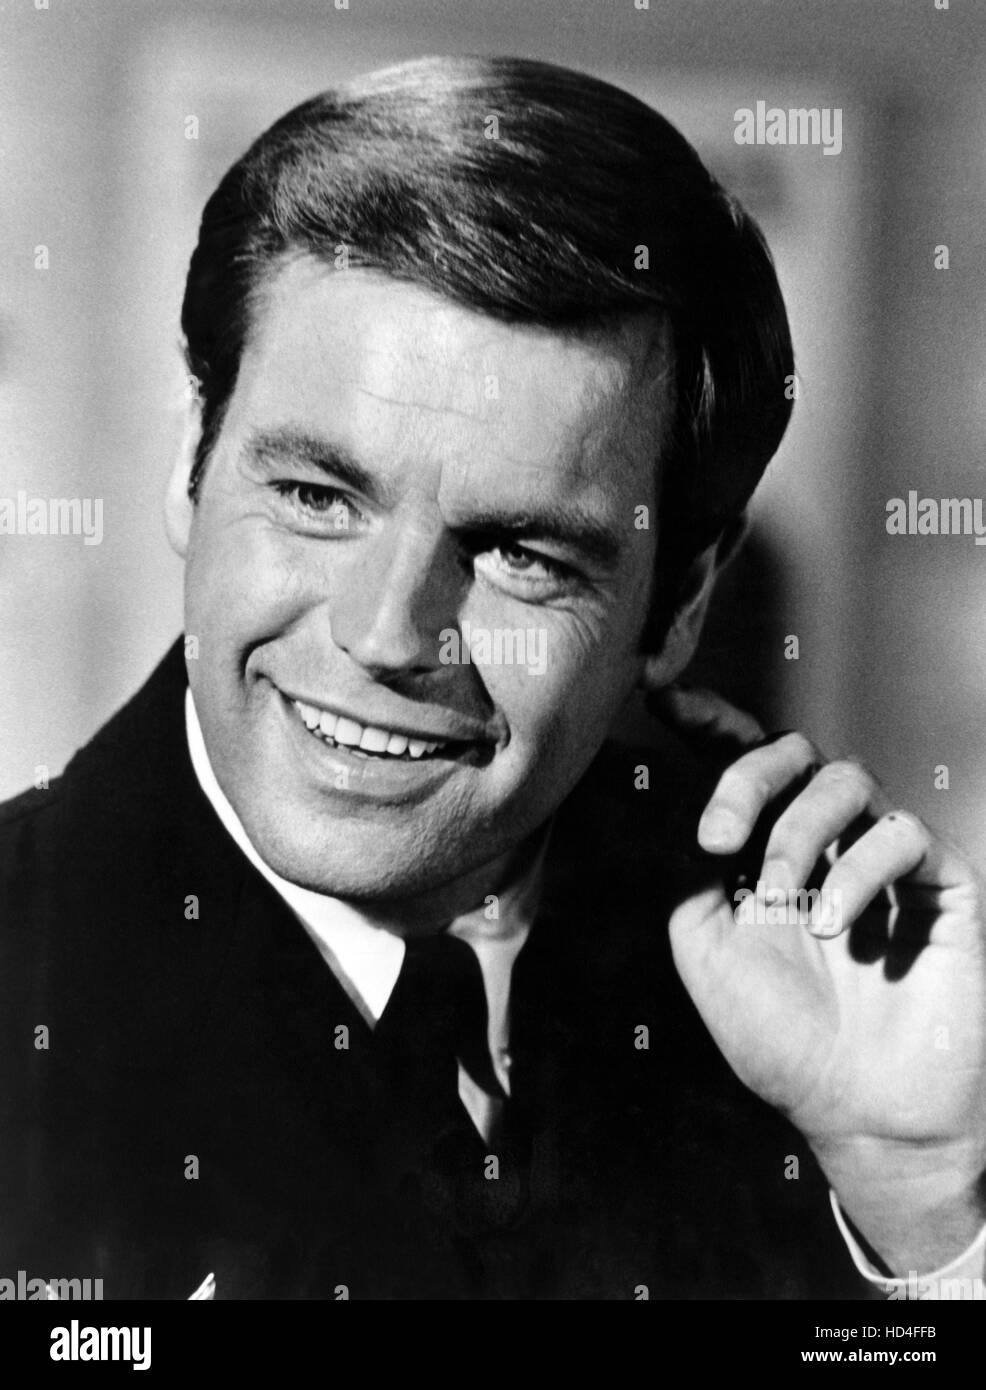 IT TAKES A THIEF, Robert Wagner, (1968), 1968-70 Stock Photo - Alamy